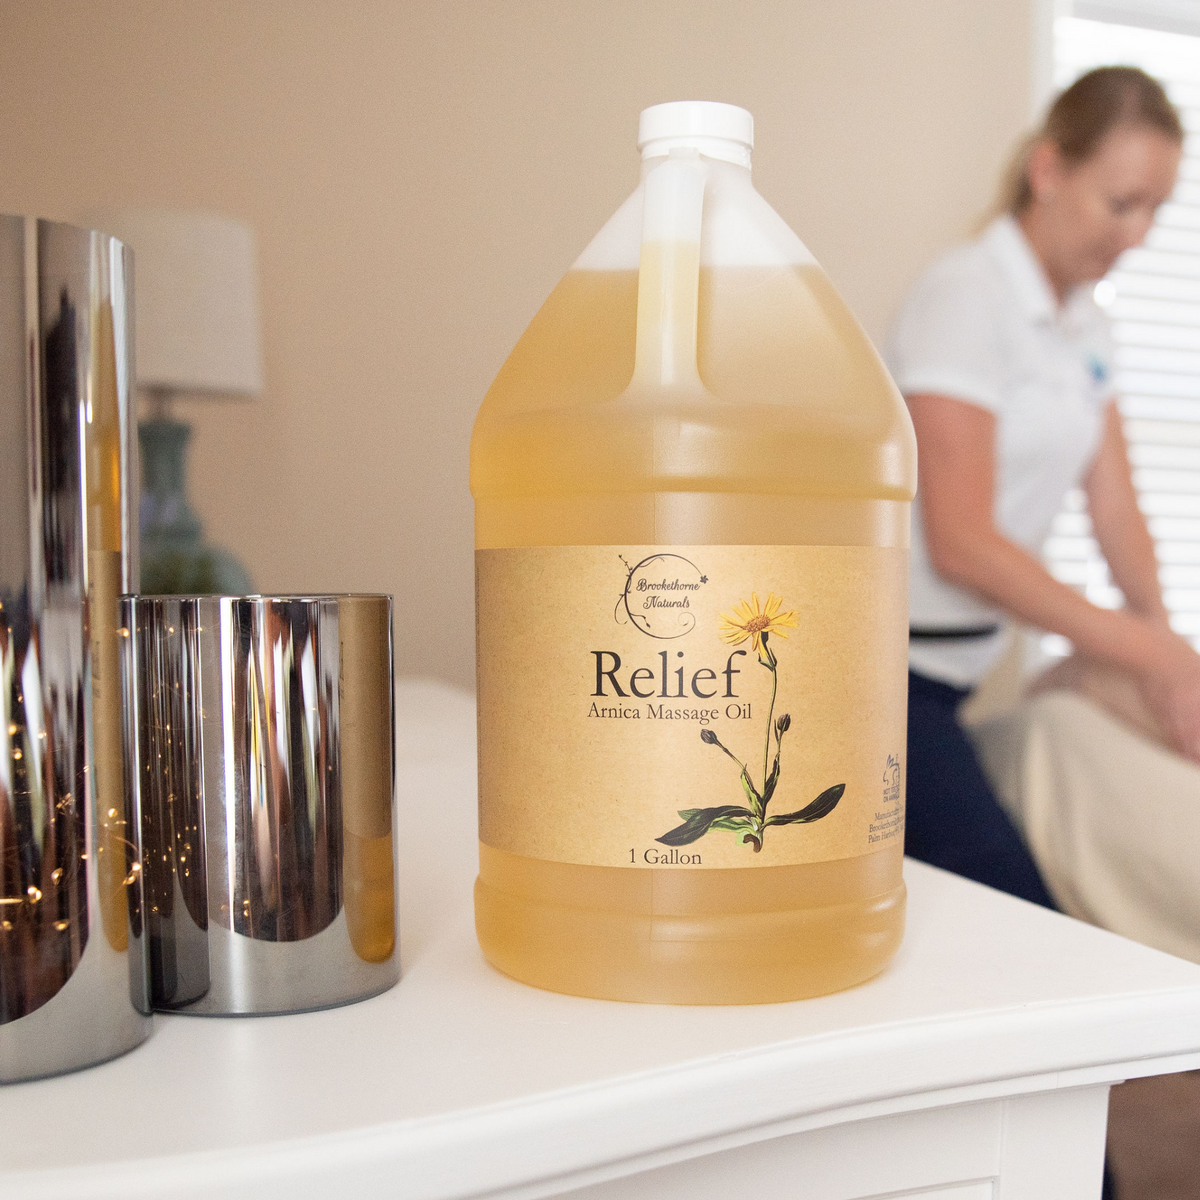 Relief Arnica Massage Oil 1 Gallon Jug, with a massage therapist in the background